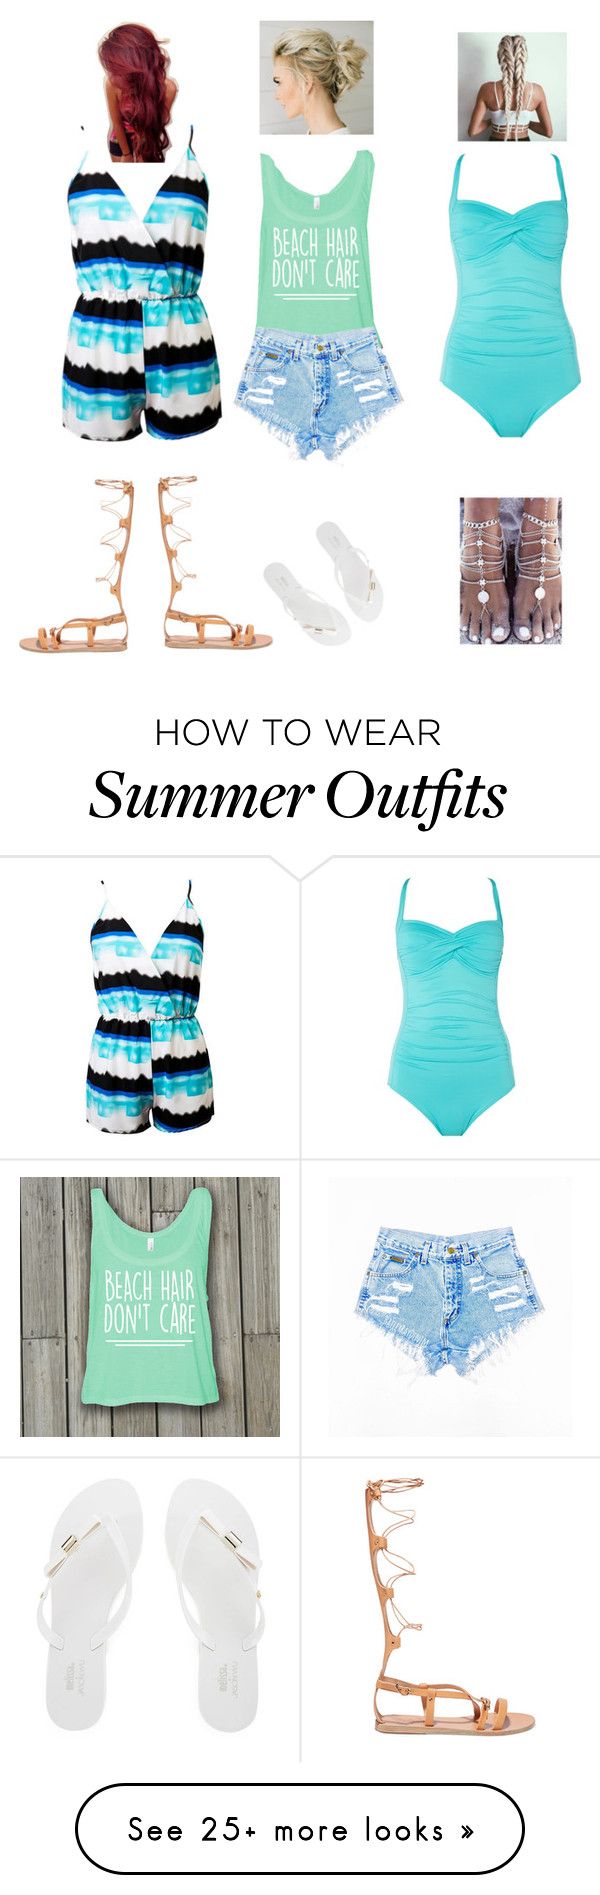 "Beach bum outfits" by the-arts-combined on Polyvore featuring Chicnov...